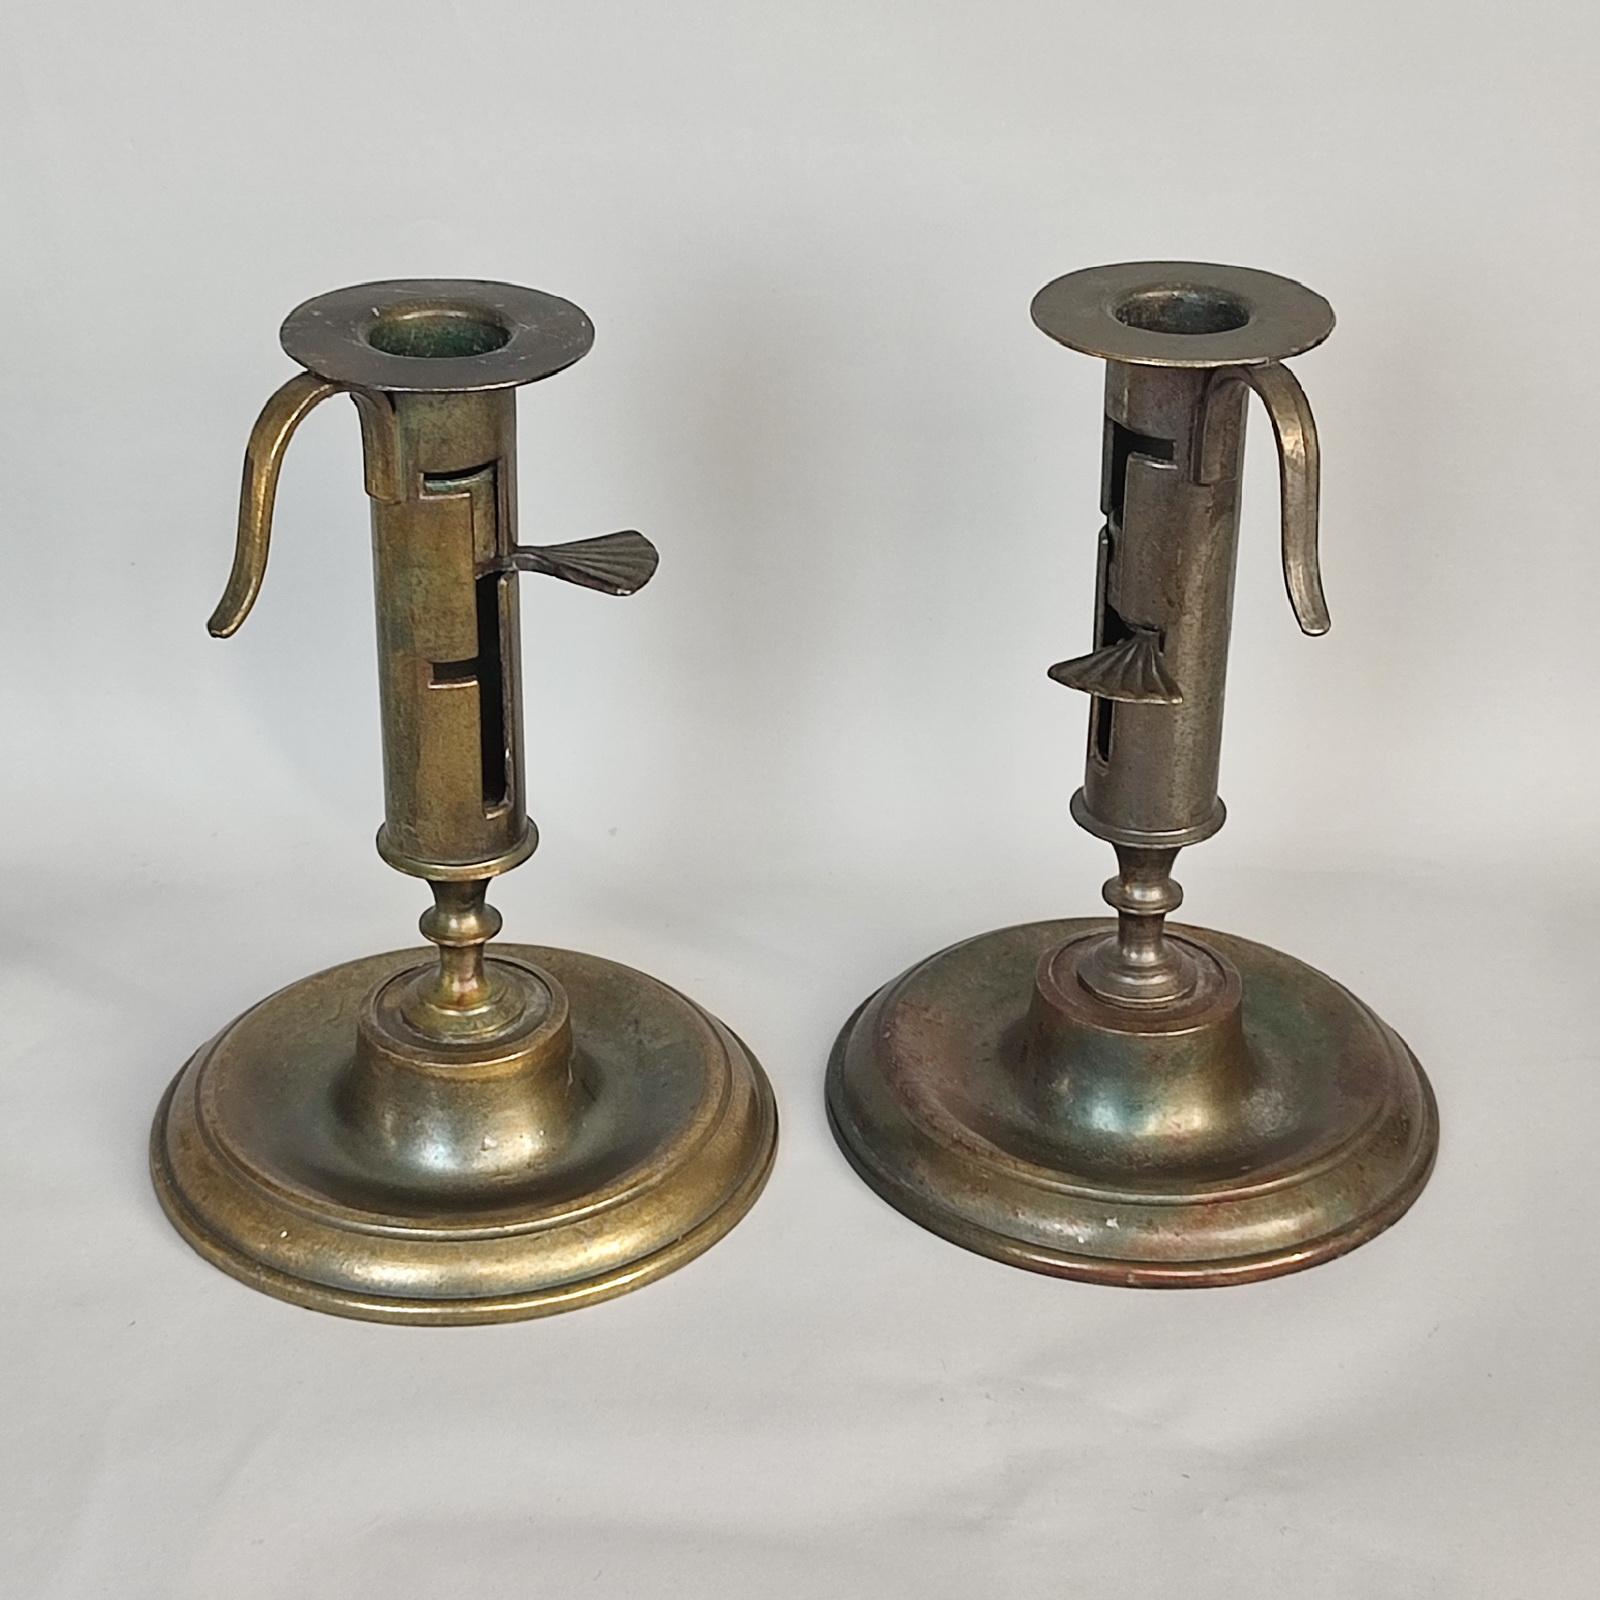 Antique Brass Adjustable Push Up Pair of Candleholders, 19th Century For Sale 2